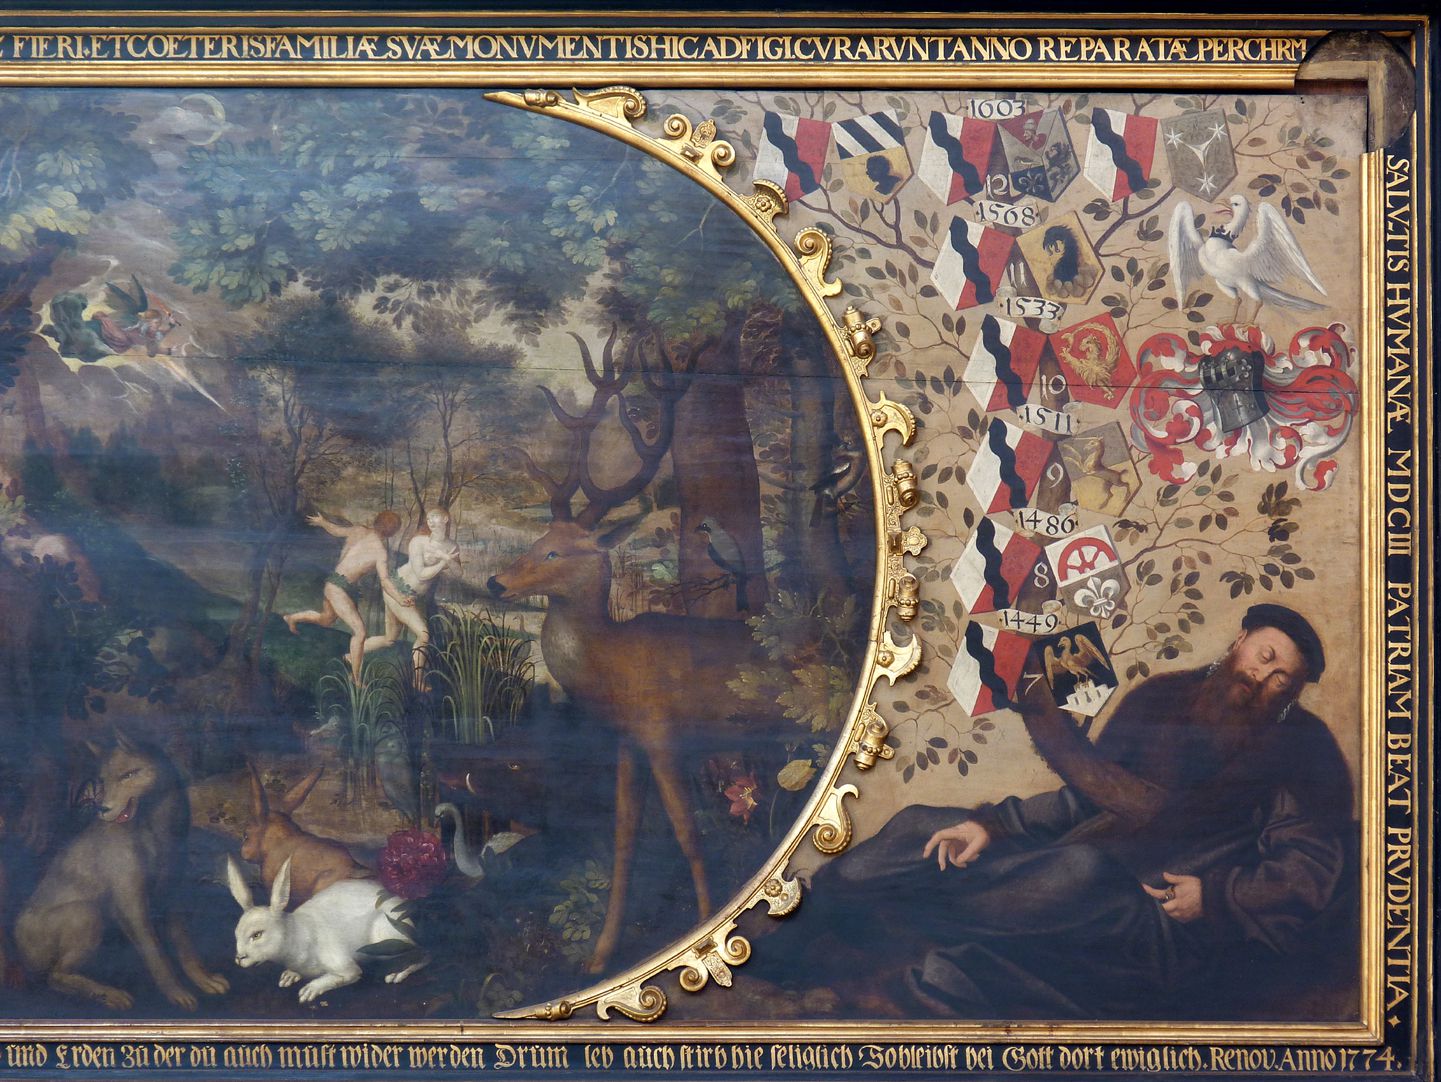 Remembrance picture of the family Behaim Right part of the picture, from left to right: expulsion of Man, animals, lying patriarch of the family Behaim with coat of arms and banners